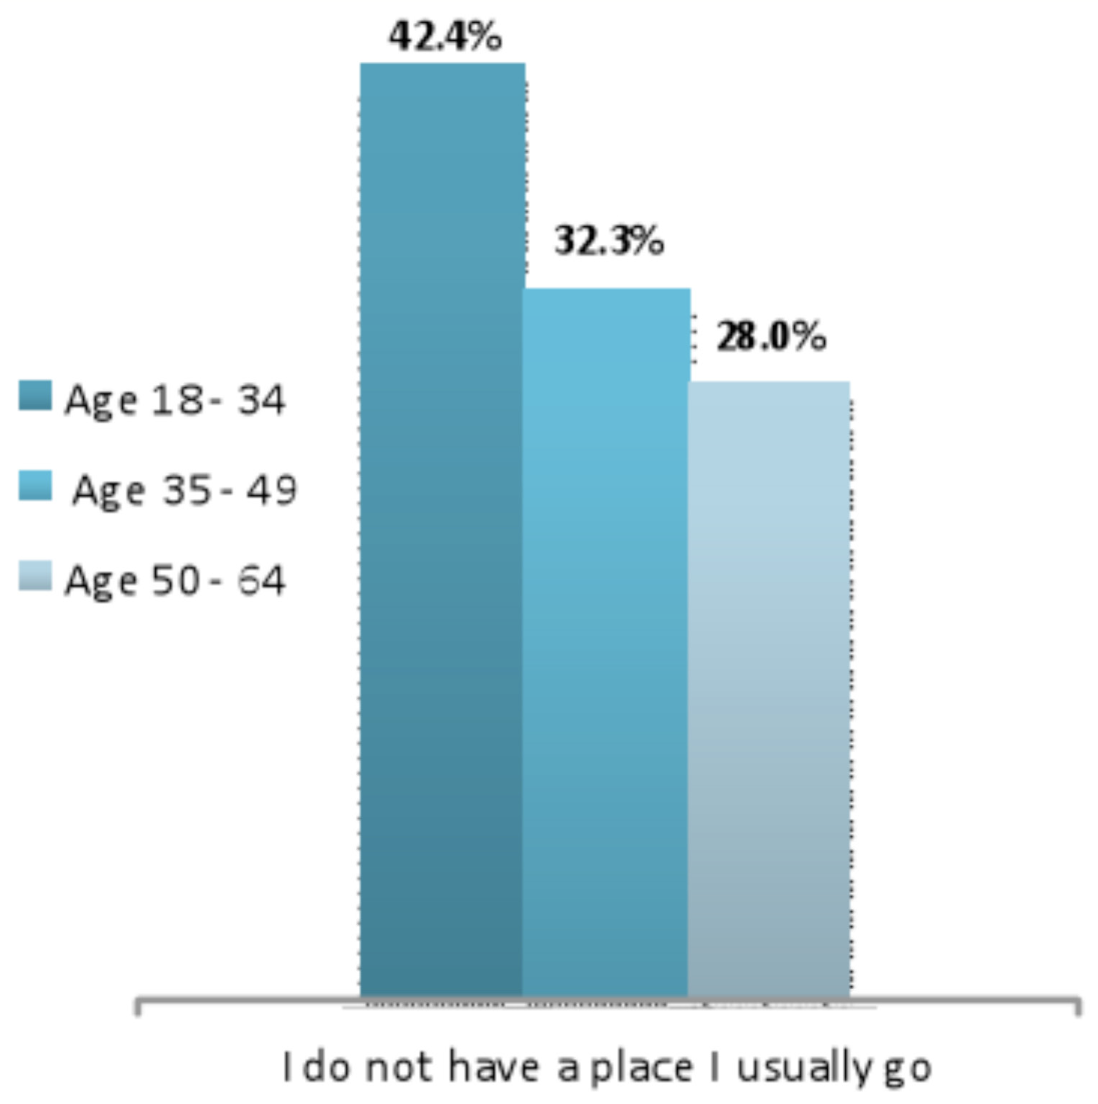 This graph compares the percentage of Texas adults who do not have a place to go when sick or need health advice by age group.